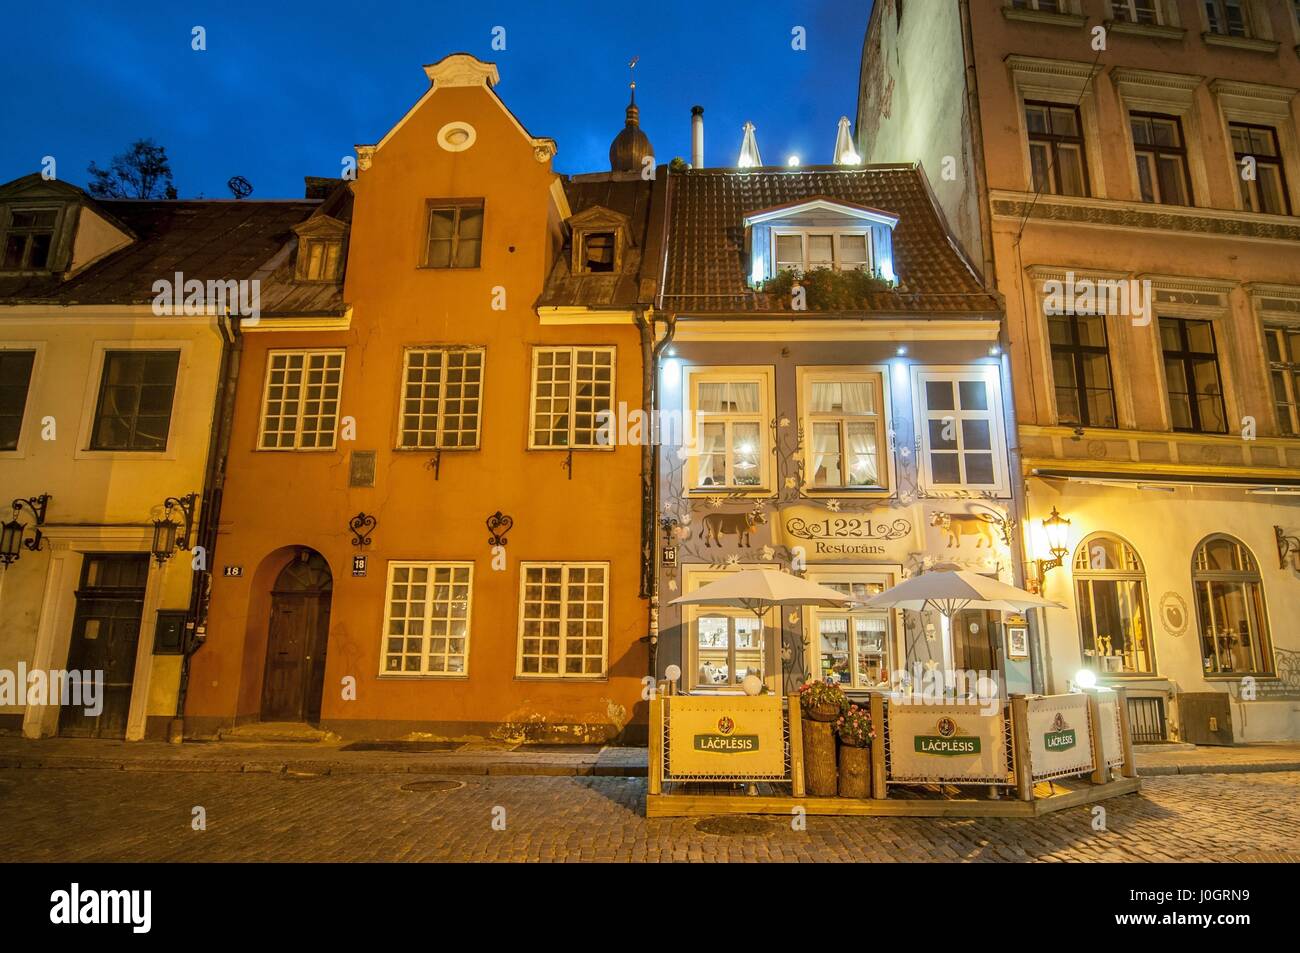 Jauniela street in Riga with building of restaurant 1221 in the historic house of Old Town Stock Photo